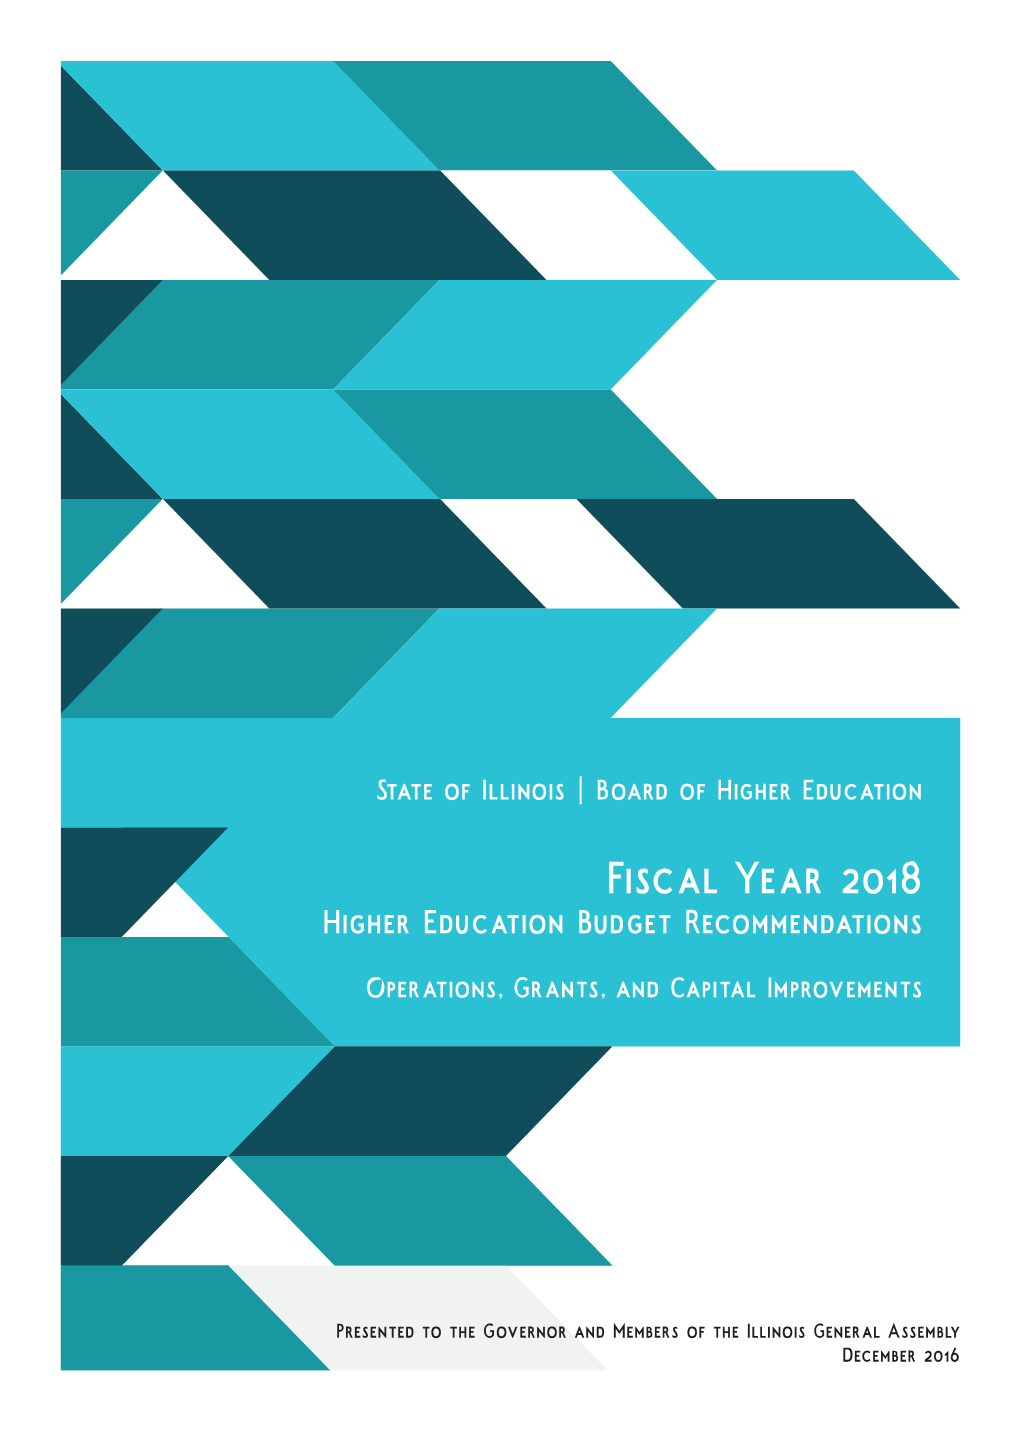 Fiscal Year 2018 Higher Education Budget Recommendations